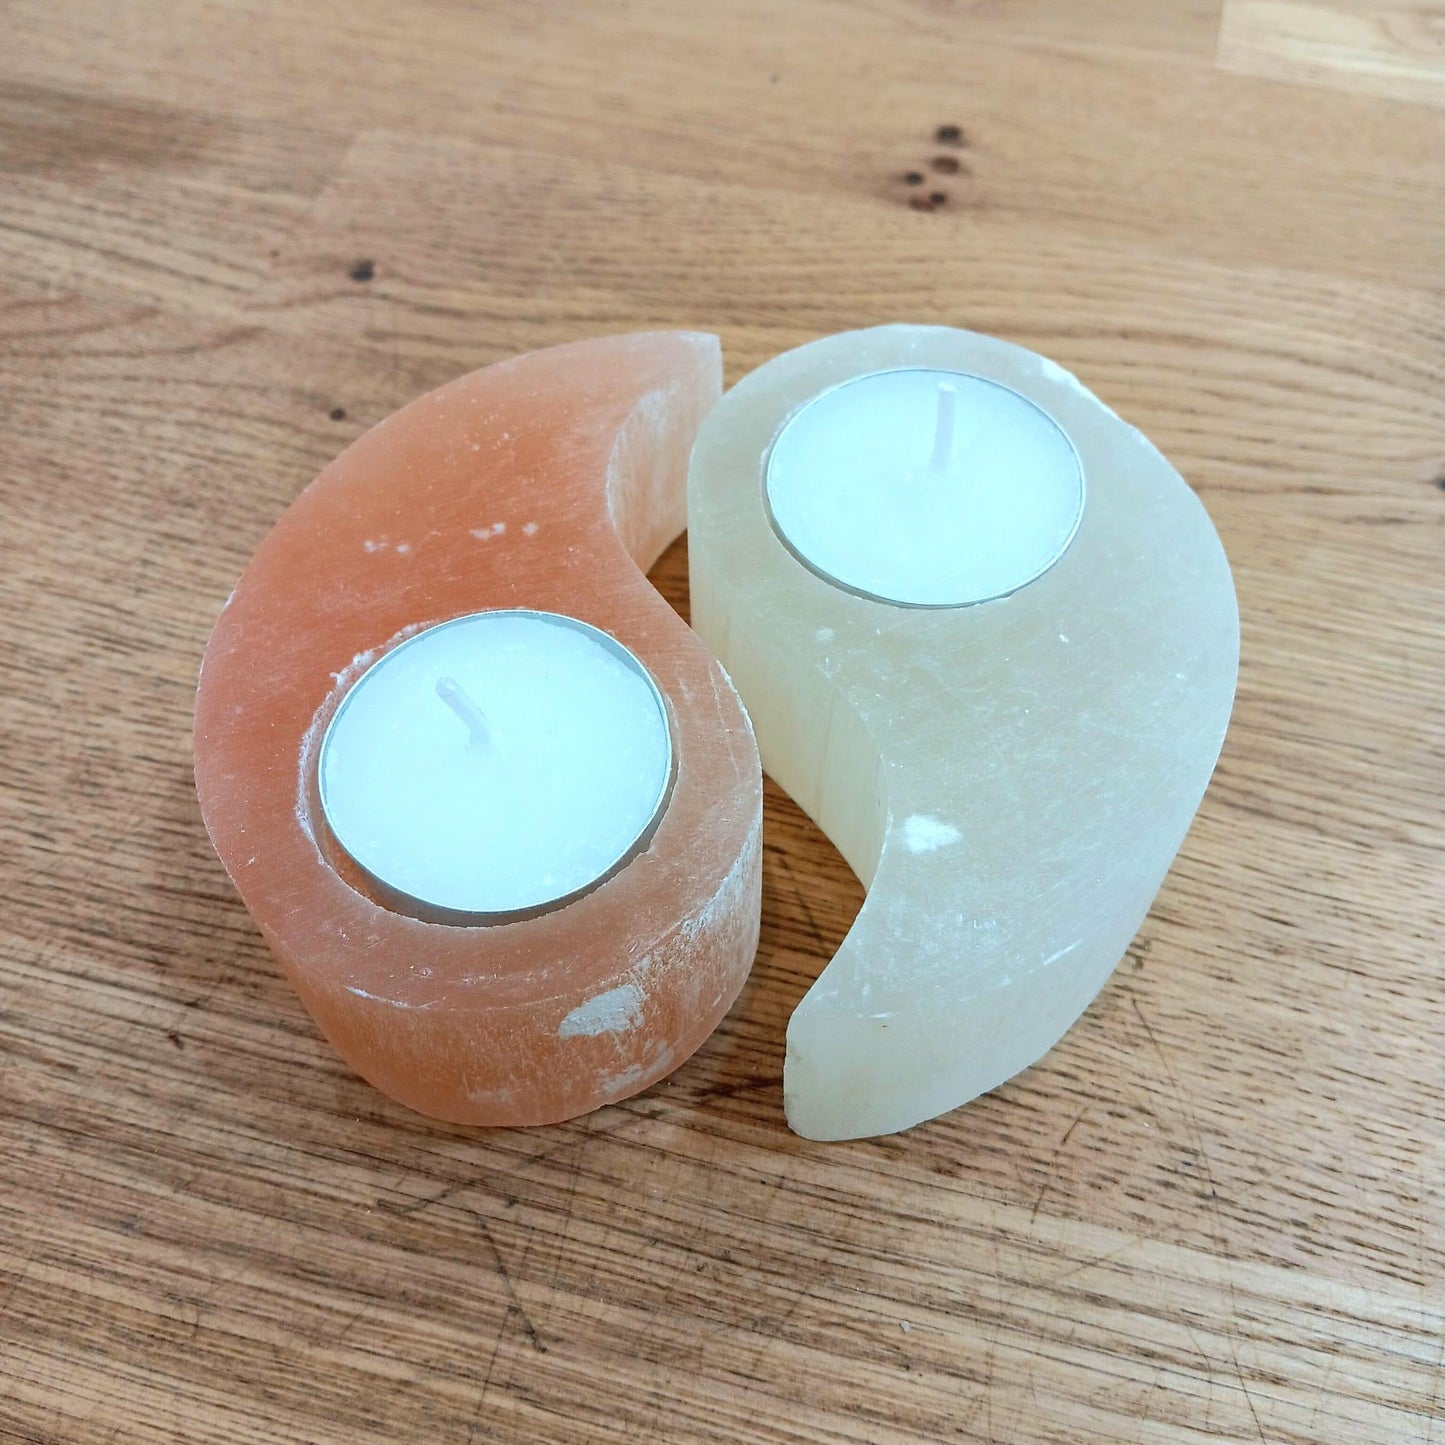 Ying Yang Selenite Candle Holde - The Harmony Store